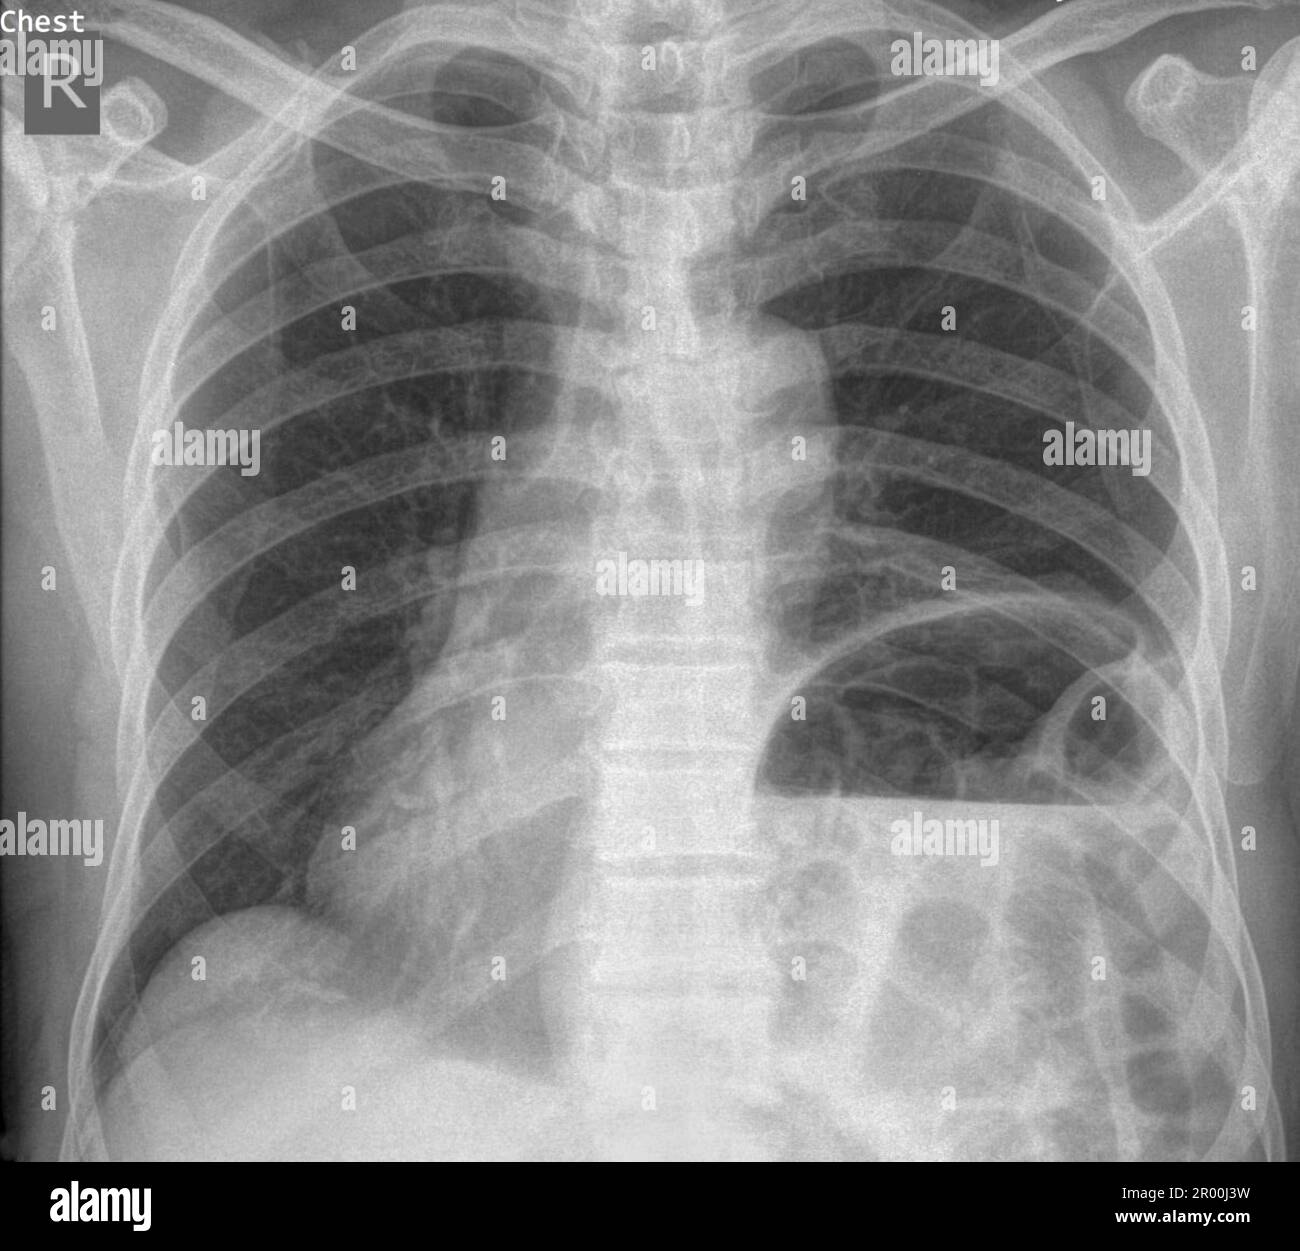 Figure 11 from Diseases of the esophagus: diagnosis with esophagography. |  Semantic Scholar